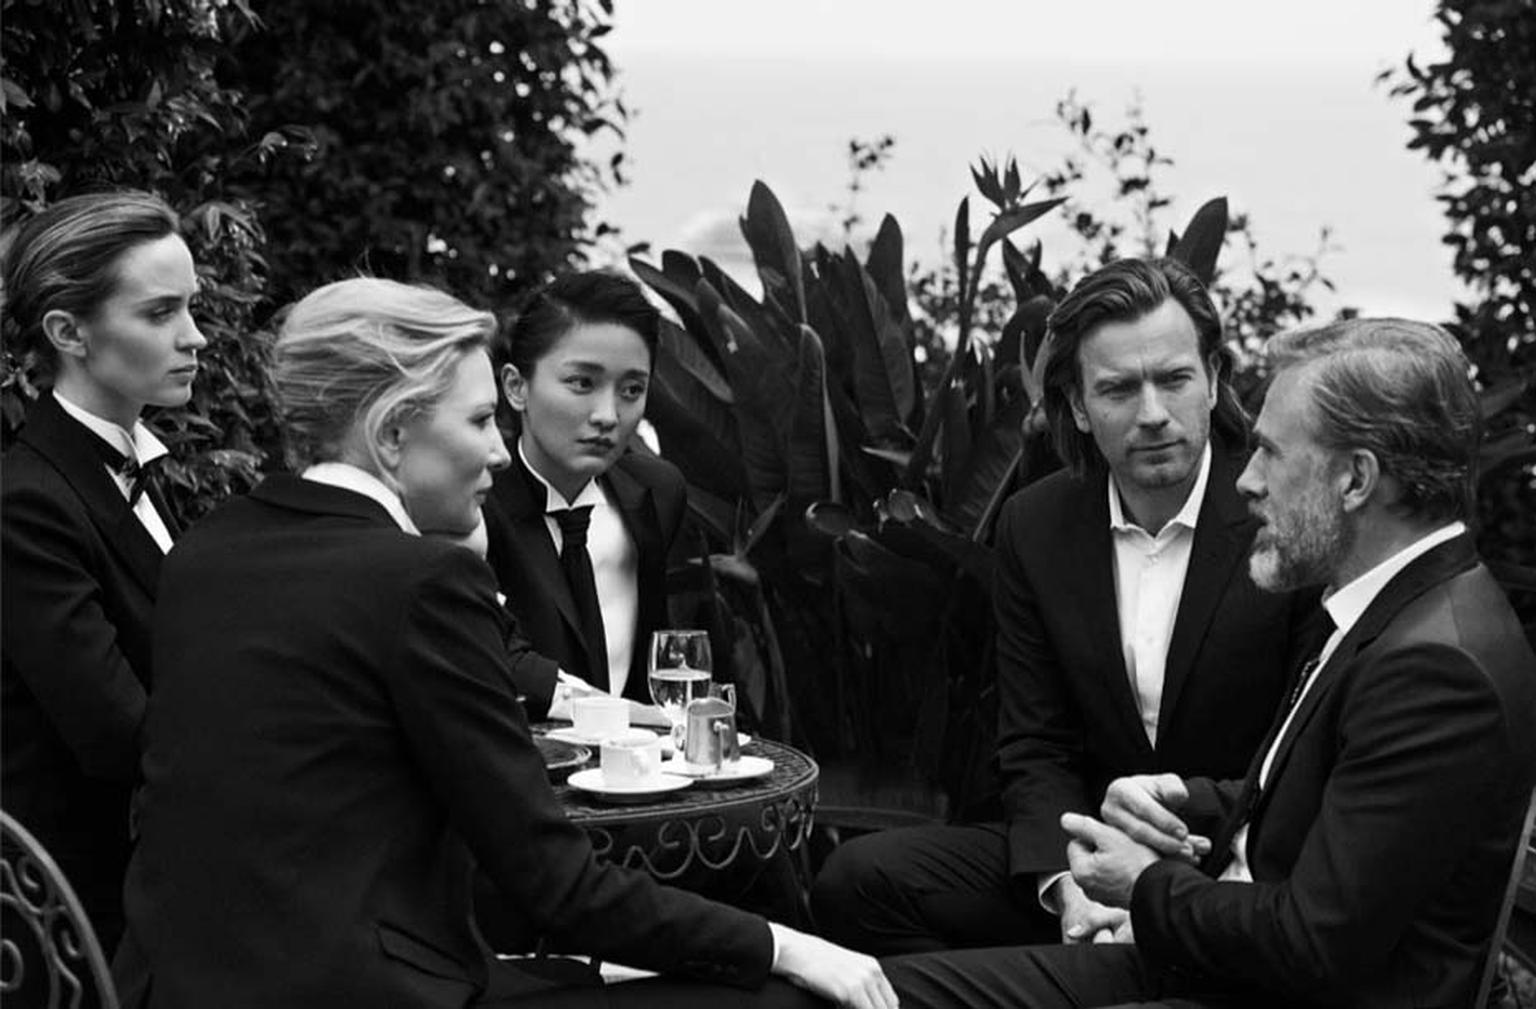 A-list actresses and actors Cate Blanchett, Emily Blunt, Zhou Xun, Ewan McGregor and Chrisoph Waltz mid-conversation in Portofino, Italy, during the Peter Lindbergh shoot.